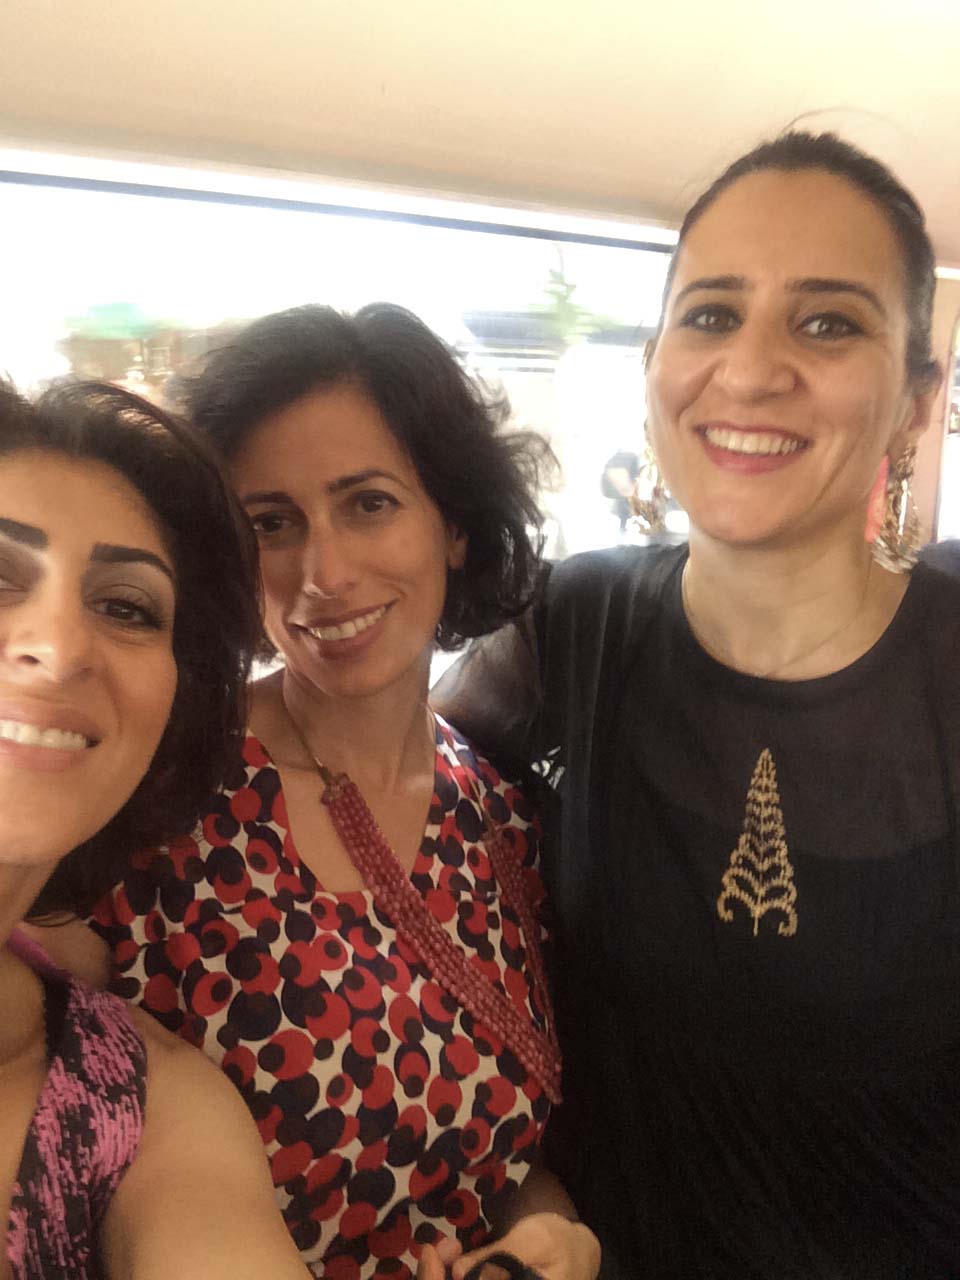 june 27 } wedding day. on the bus from the ceremony, which took place in the chelsea old town hall. my new friend razan, laila and me